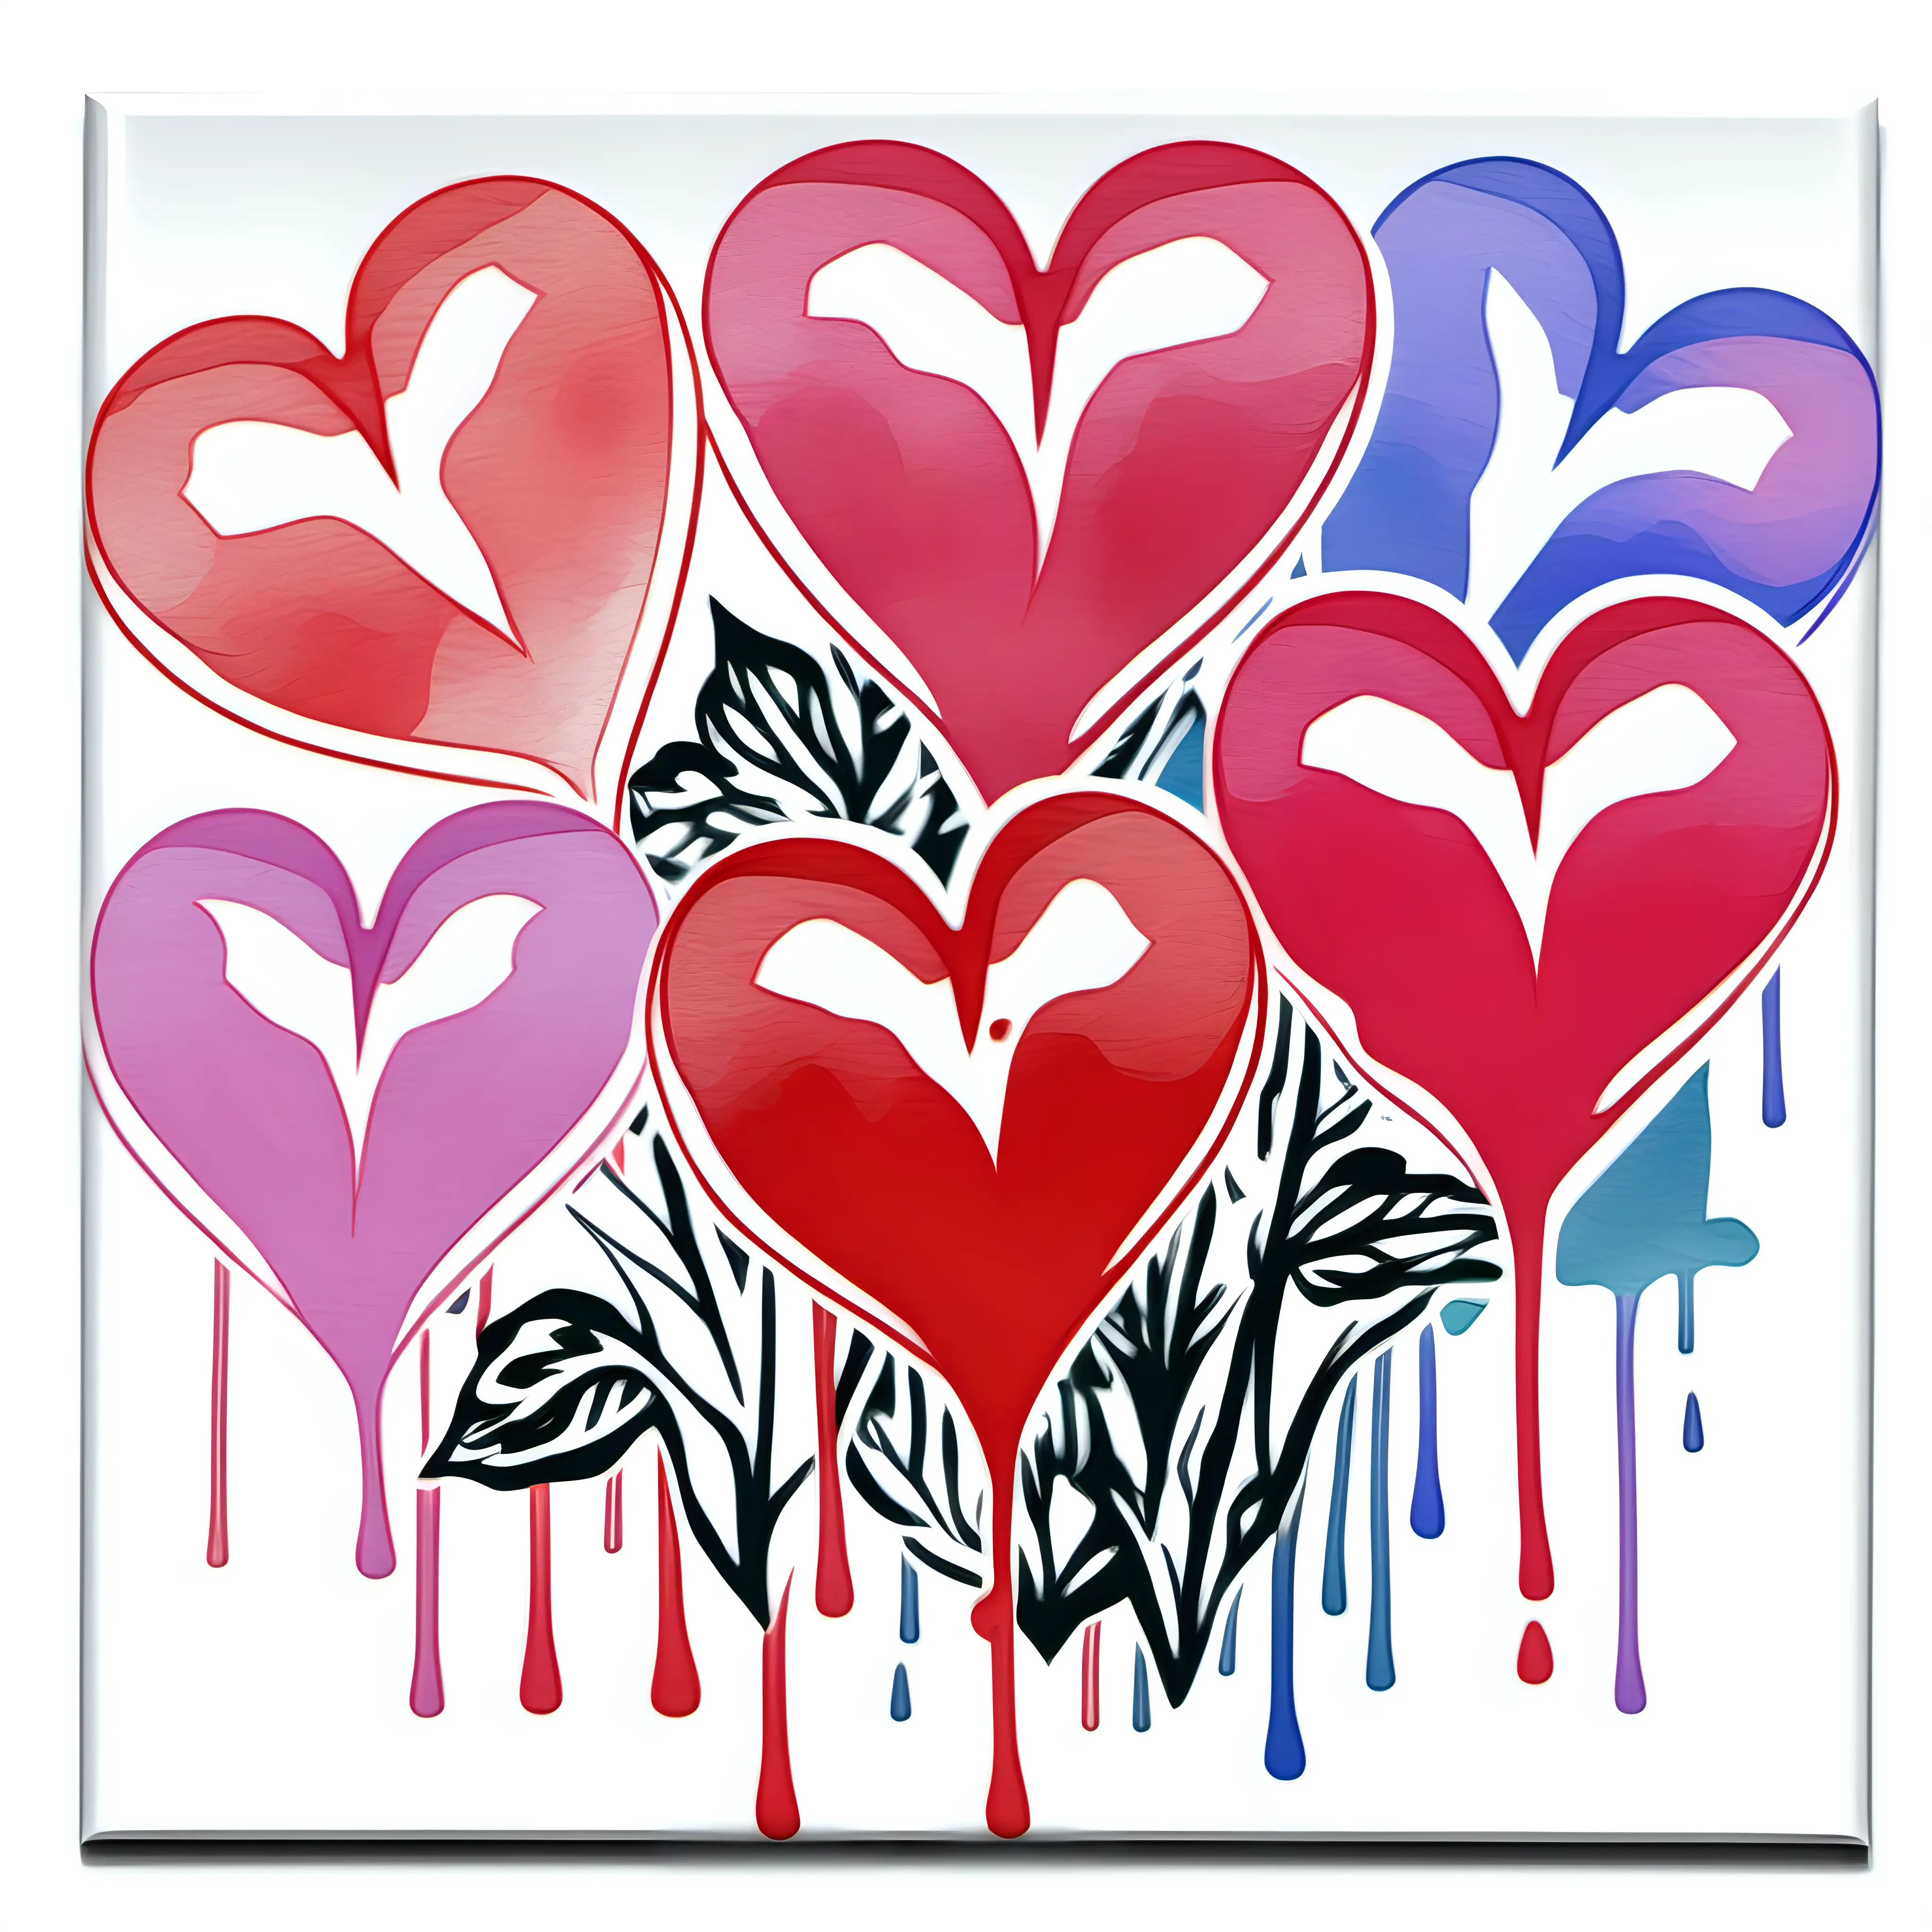 /imagine prompt pastel watercolor BLEEDING HEART flowers clipart on a white background andy warhol inspired--tile